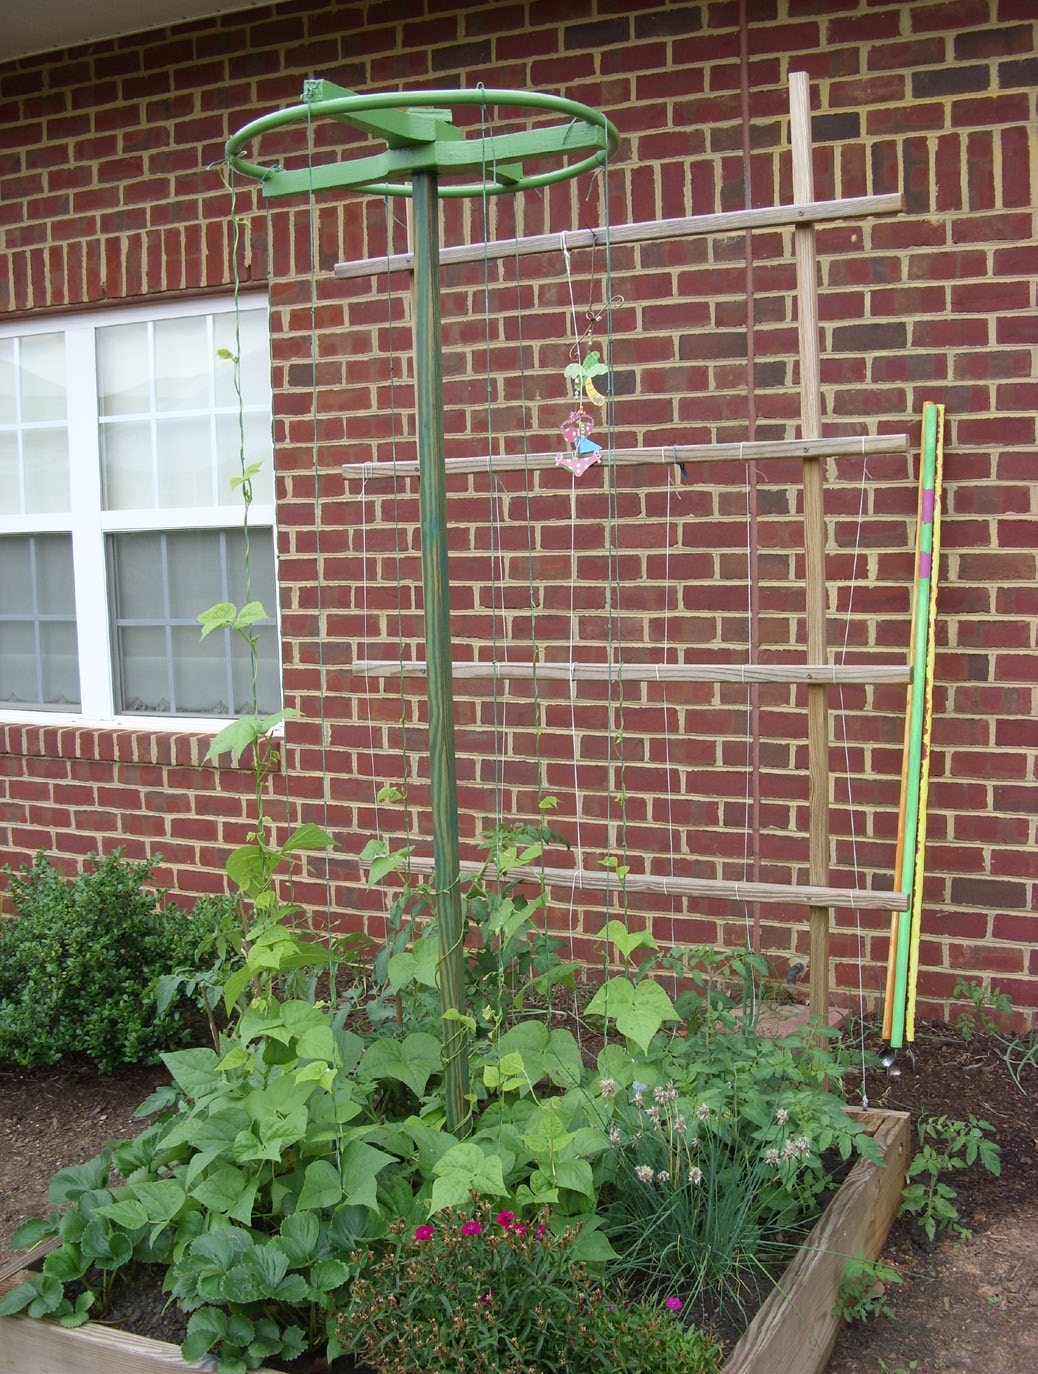 An example of a low raised bed in front of a brick wall.